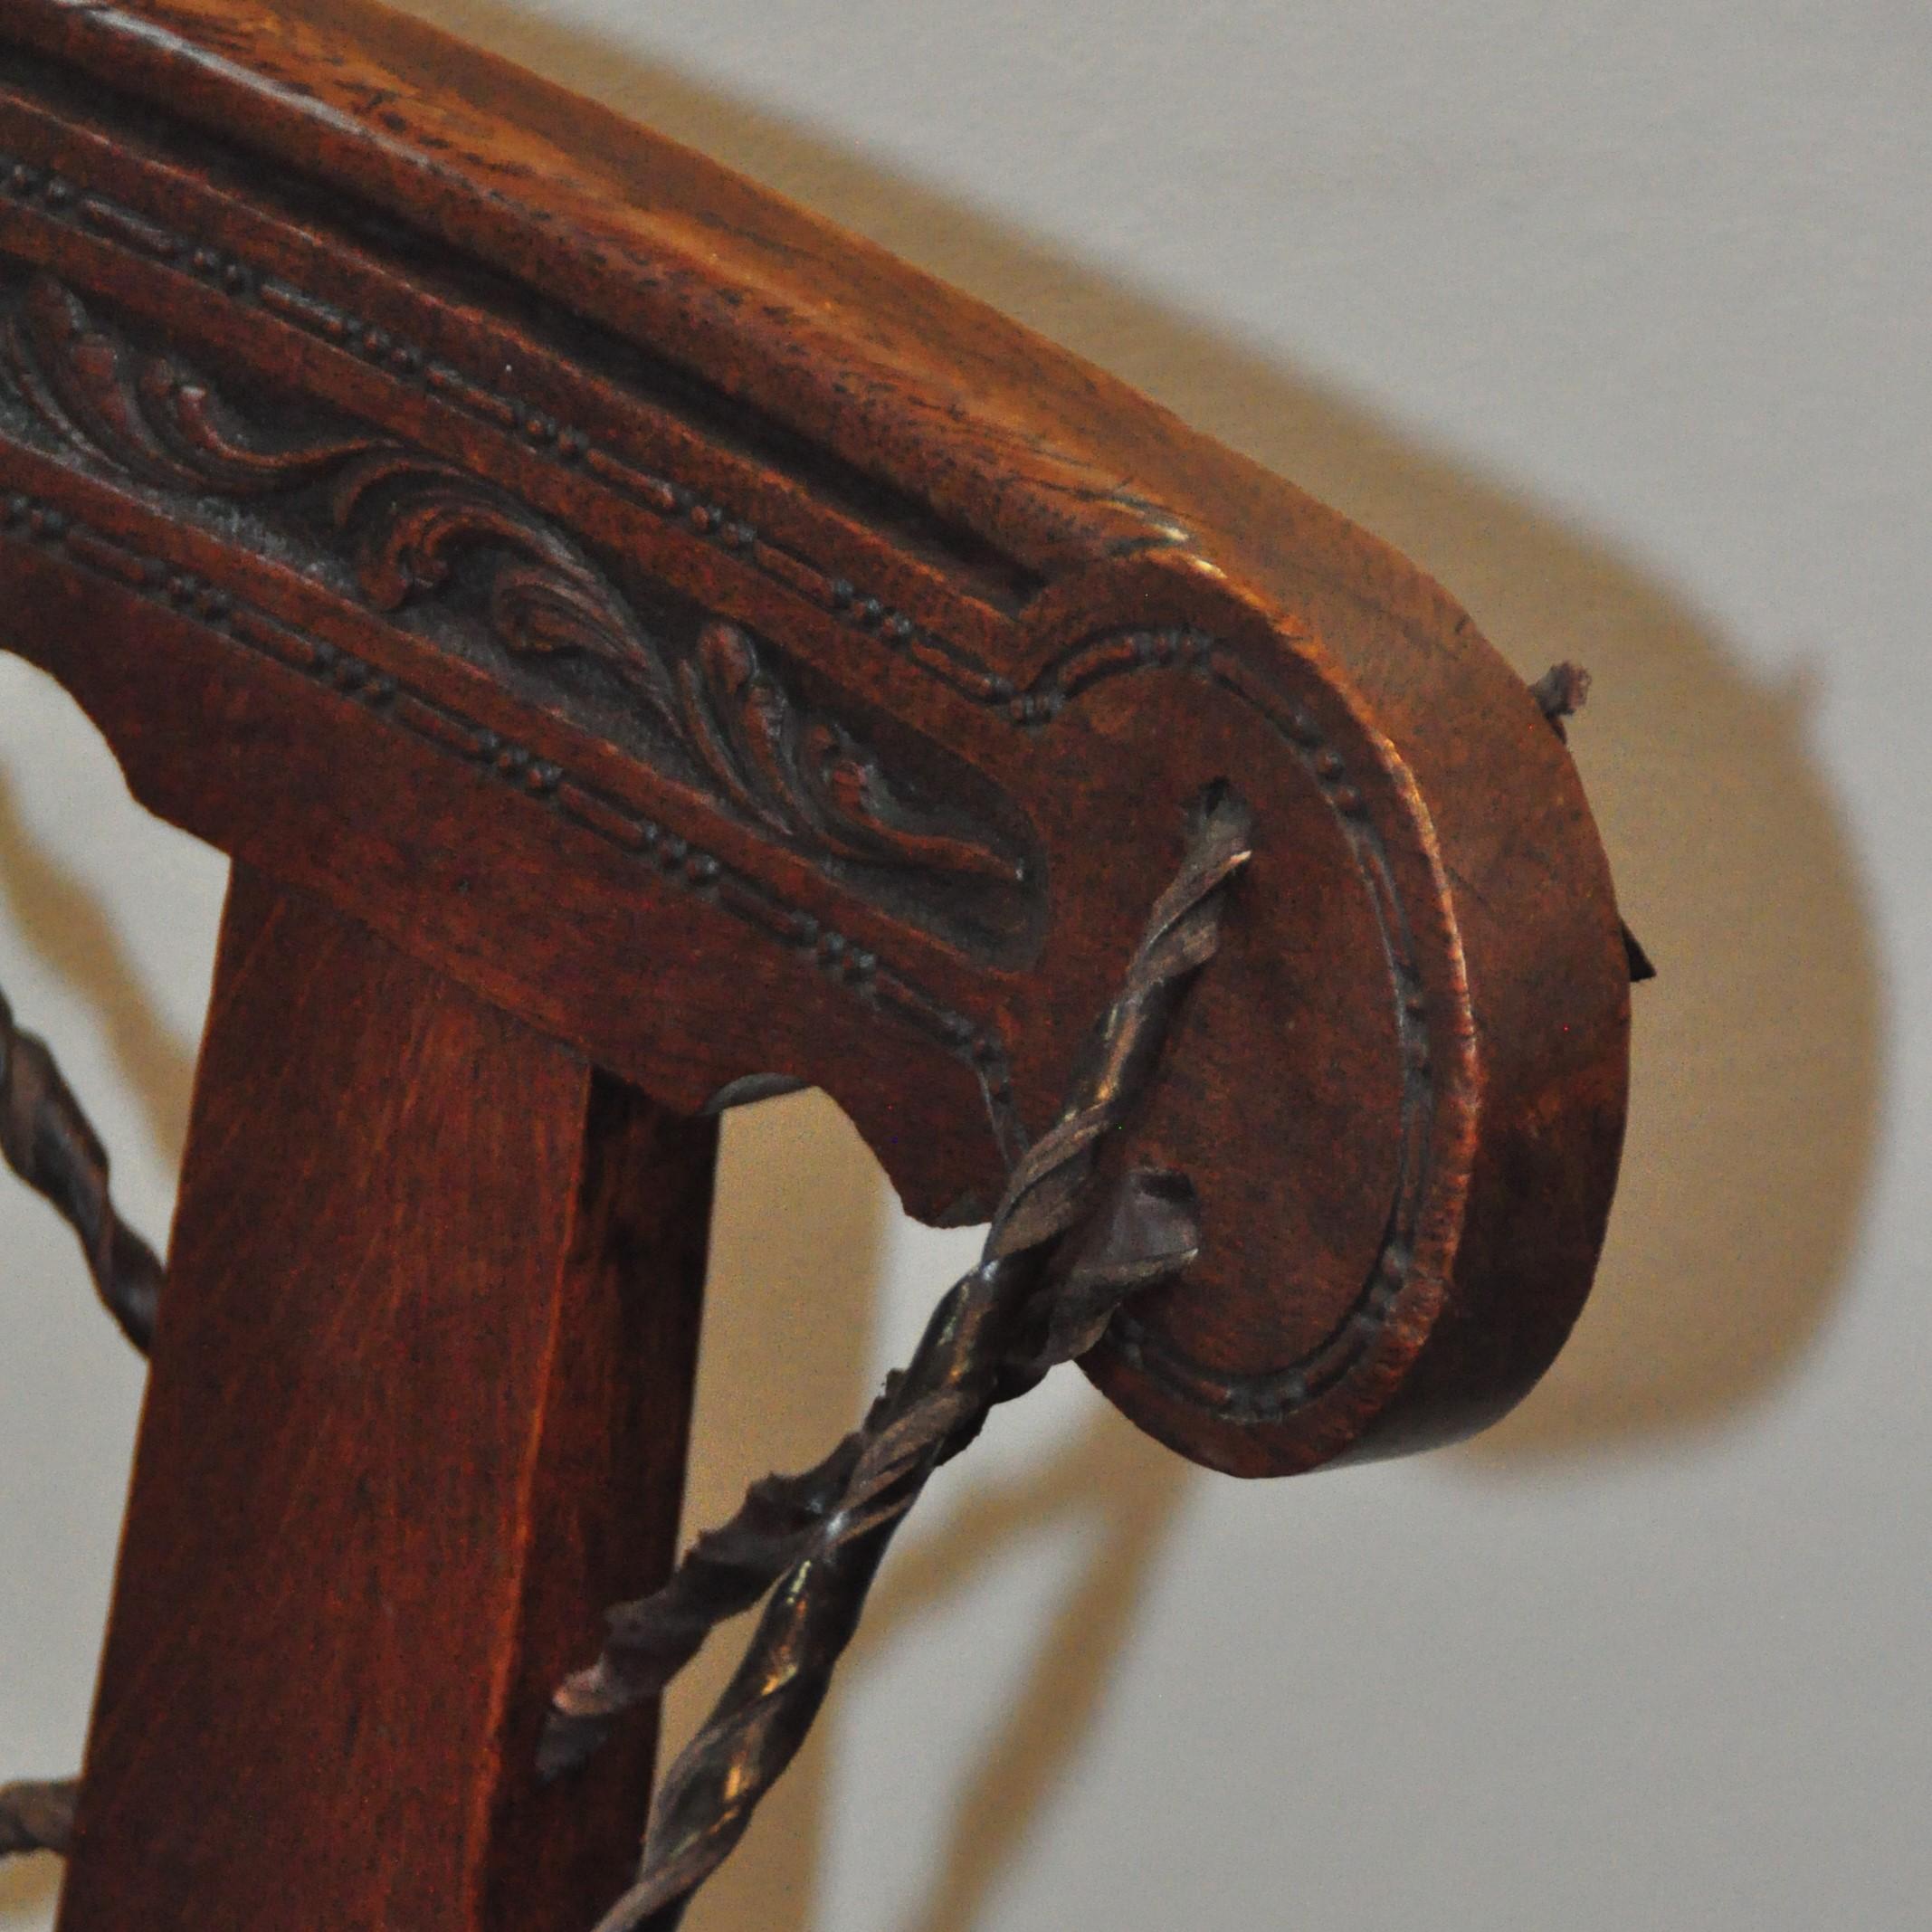 19th Century Arts & Crafts Corner Chair with Leather Turned Straps